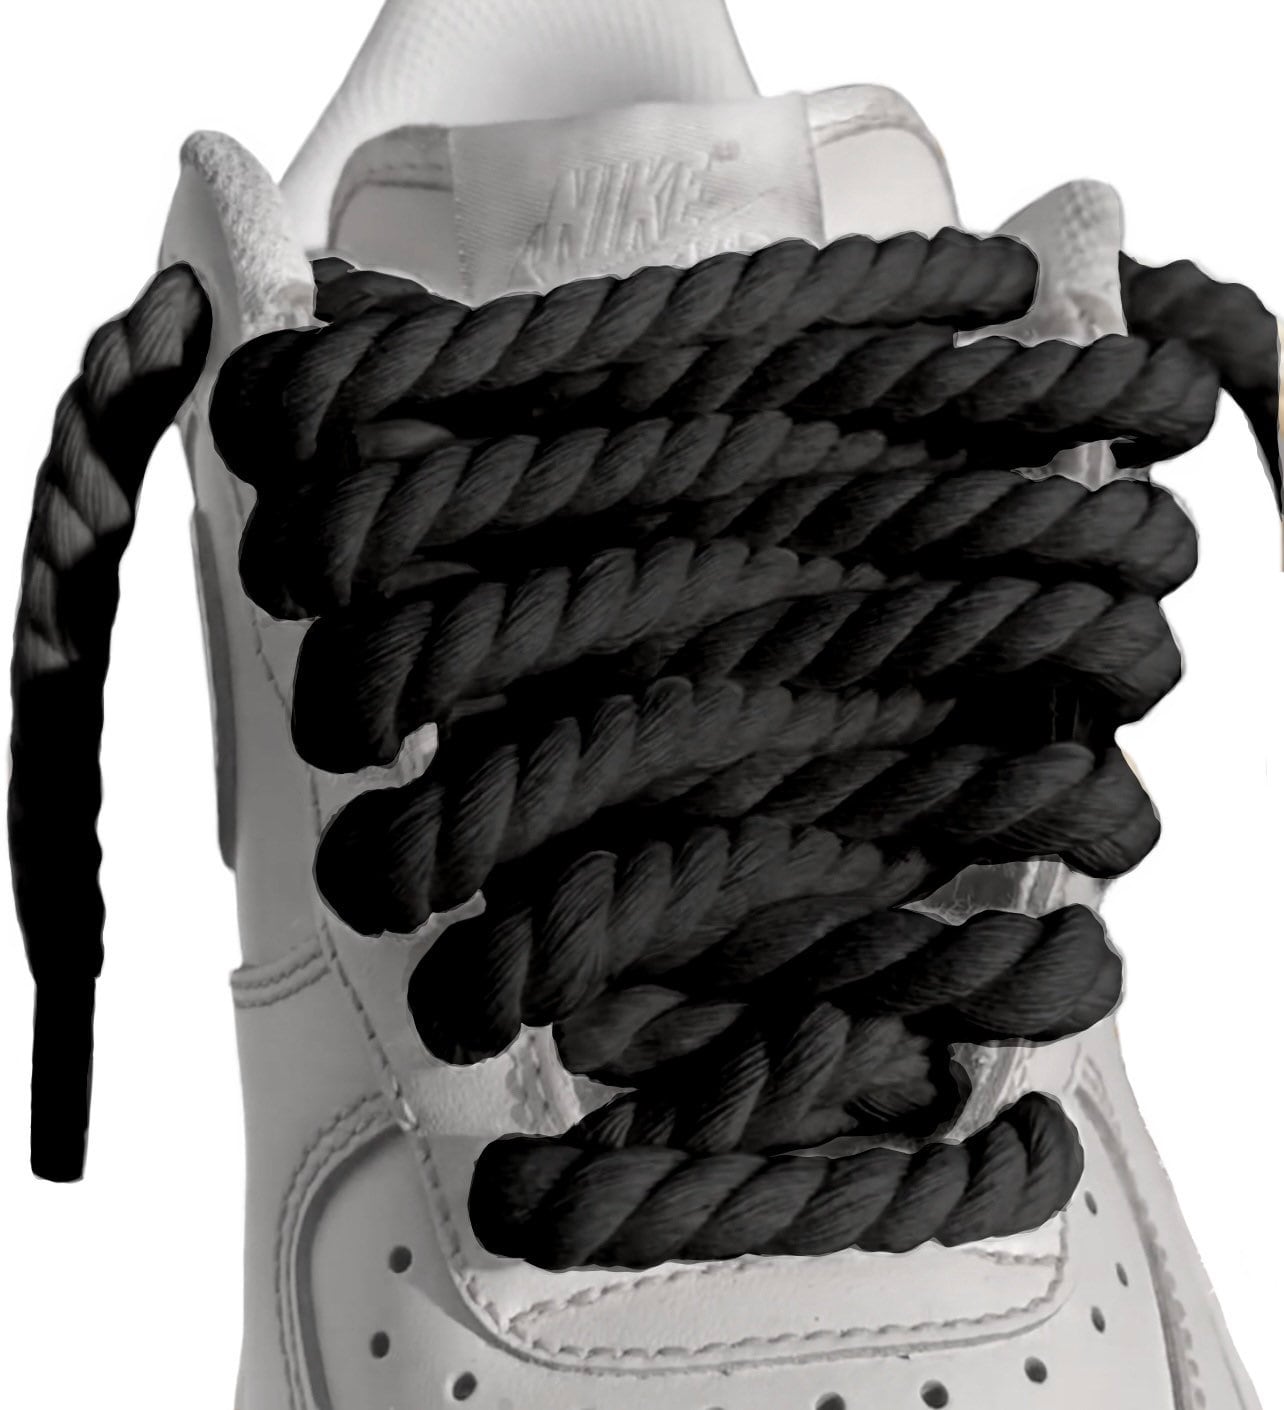 Super Chunky Thick Braided Rope AF1 Shoelaces for Air Force 1, Dunks,  Jordans & More 